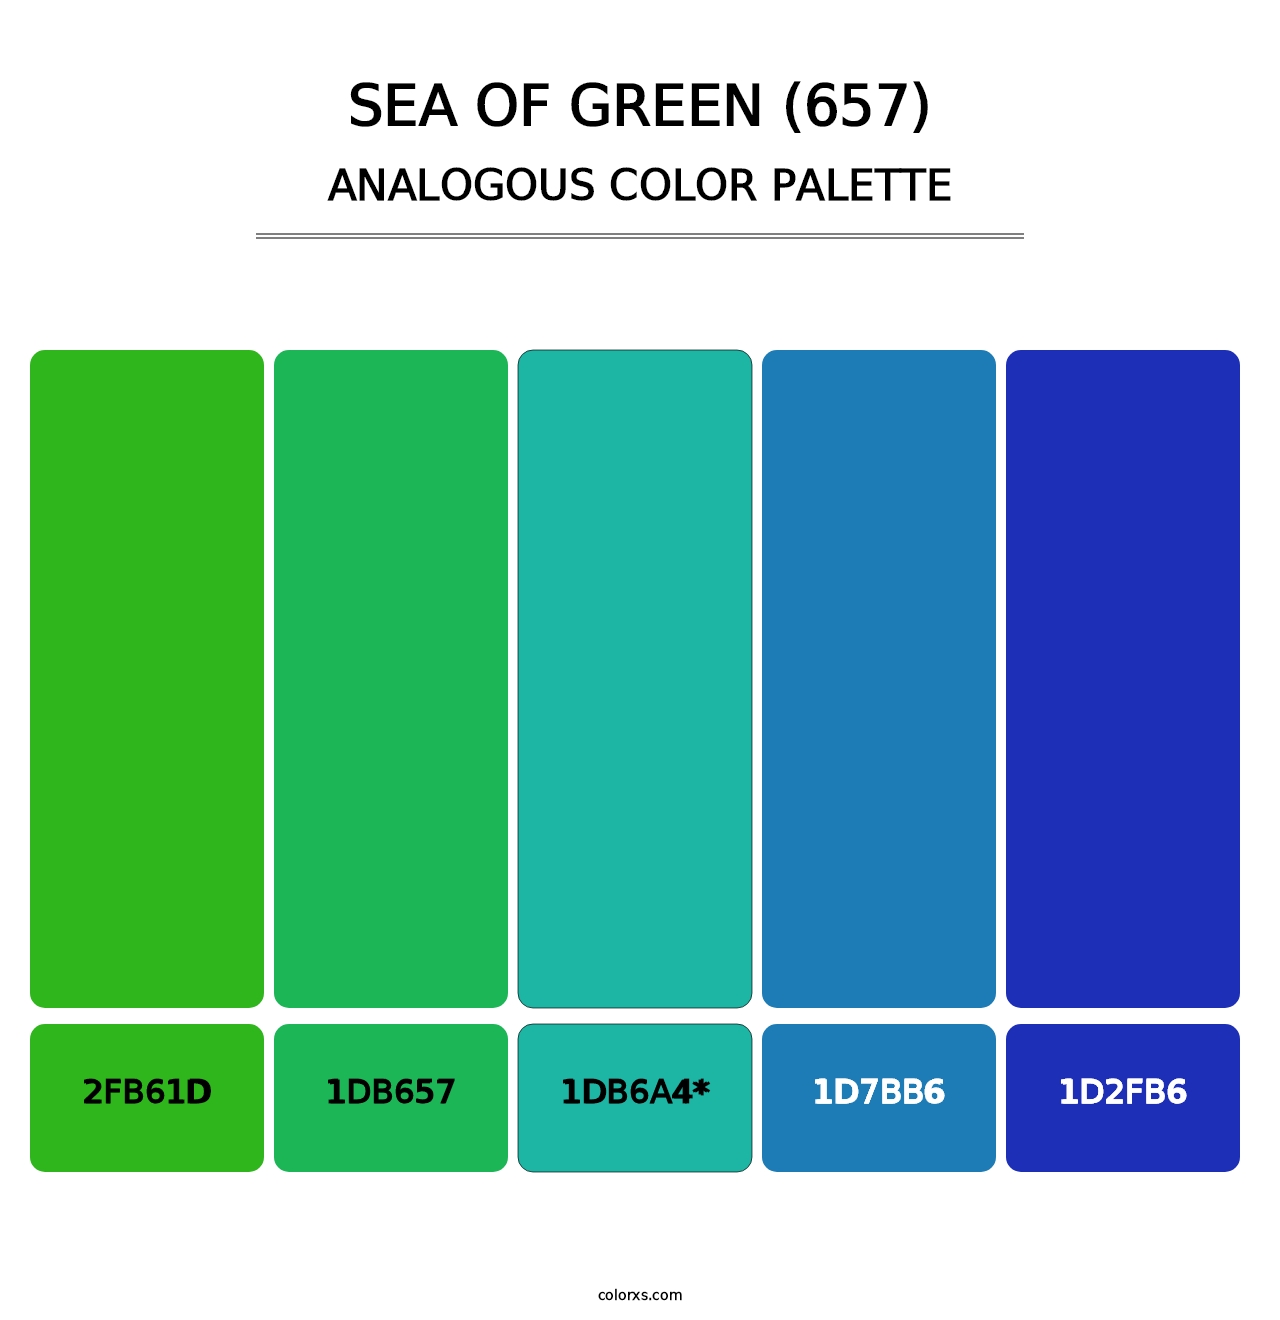 Sea of Green (657) - Analogous Color Palette